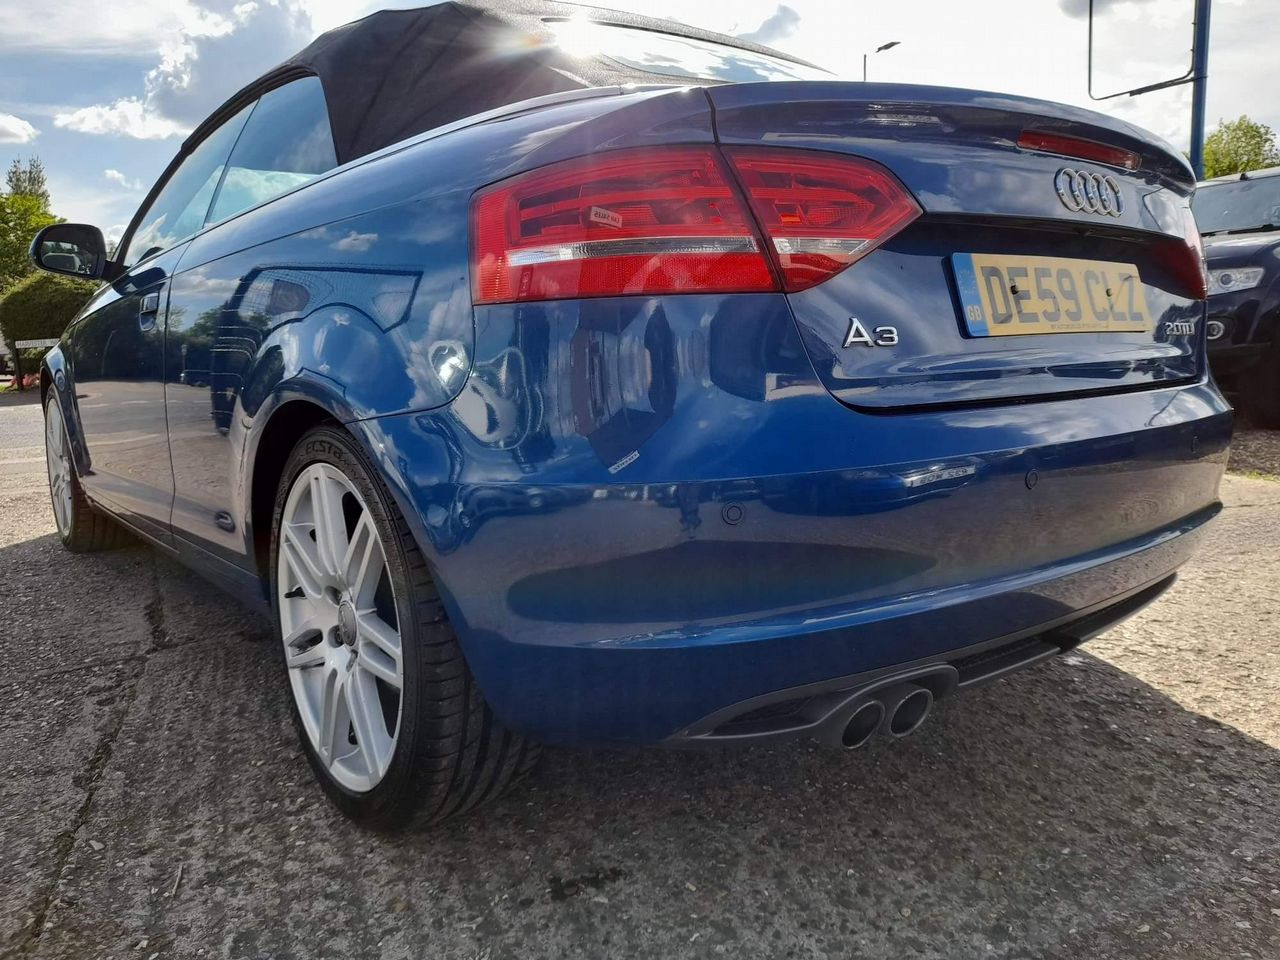 2009 Audi A3 Cabriolet 2.0 TDI S line Euro 4 2dr - Picture 8 of 37